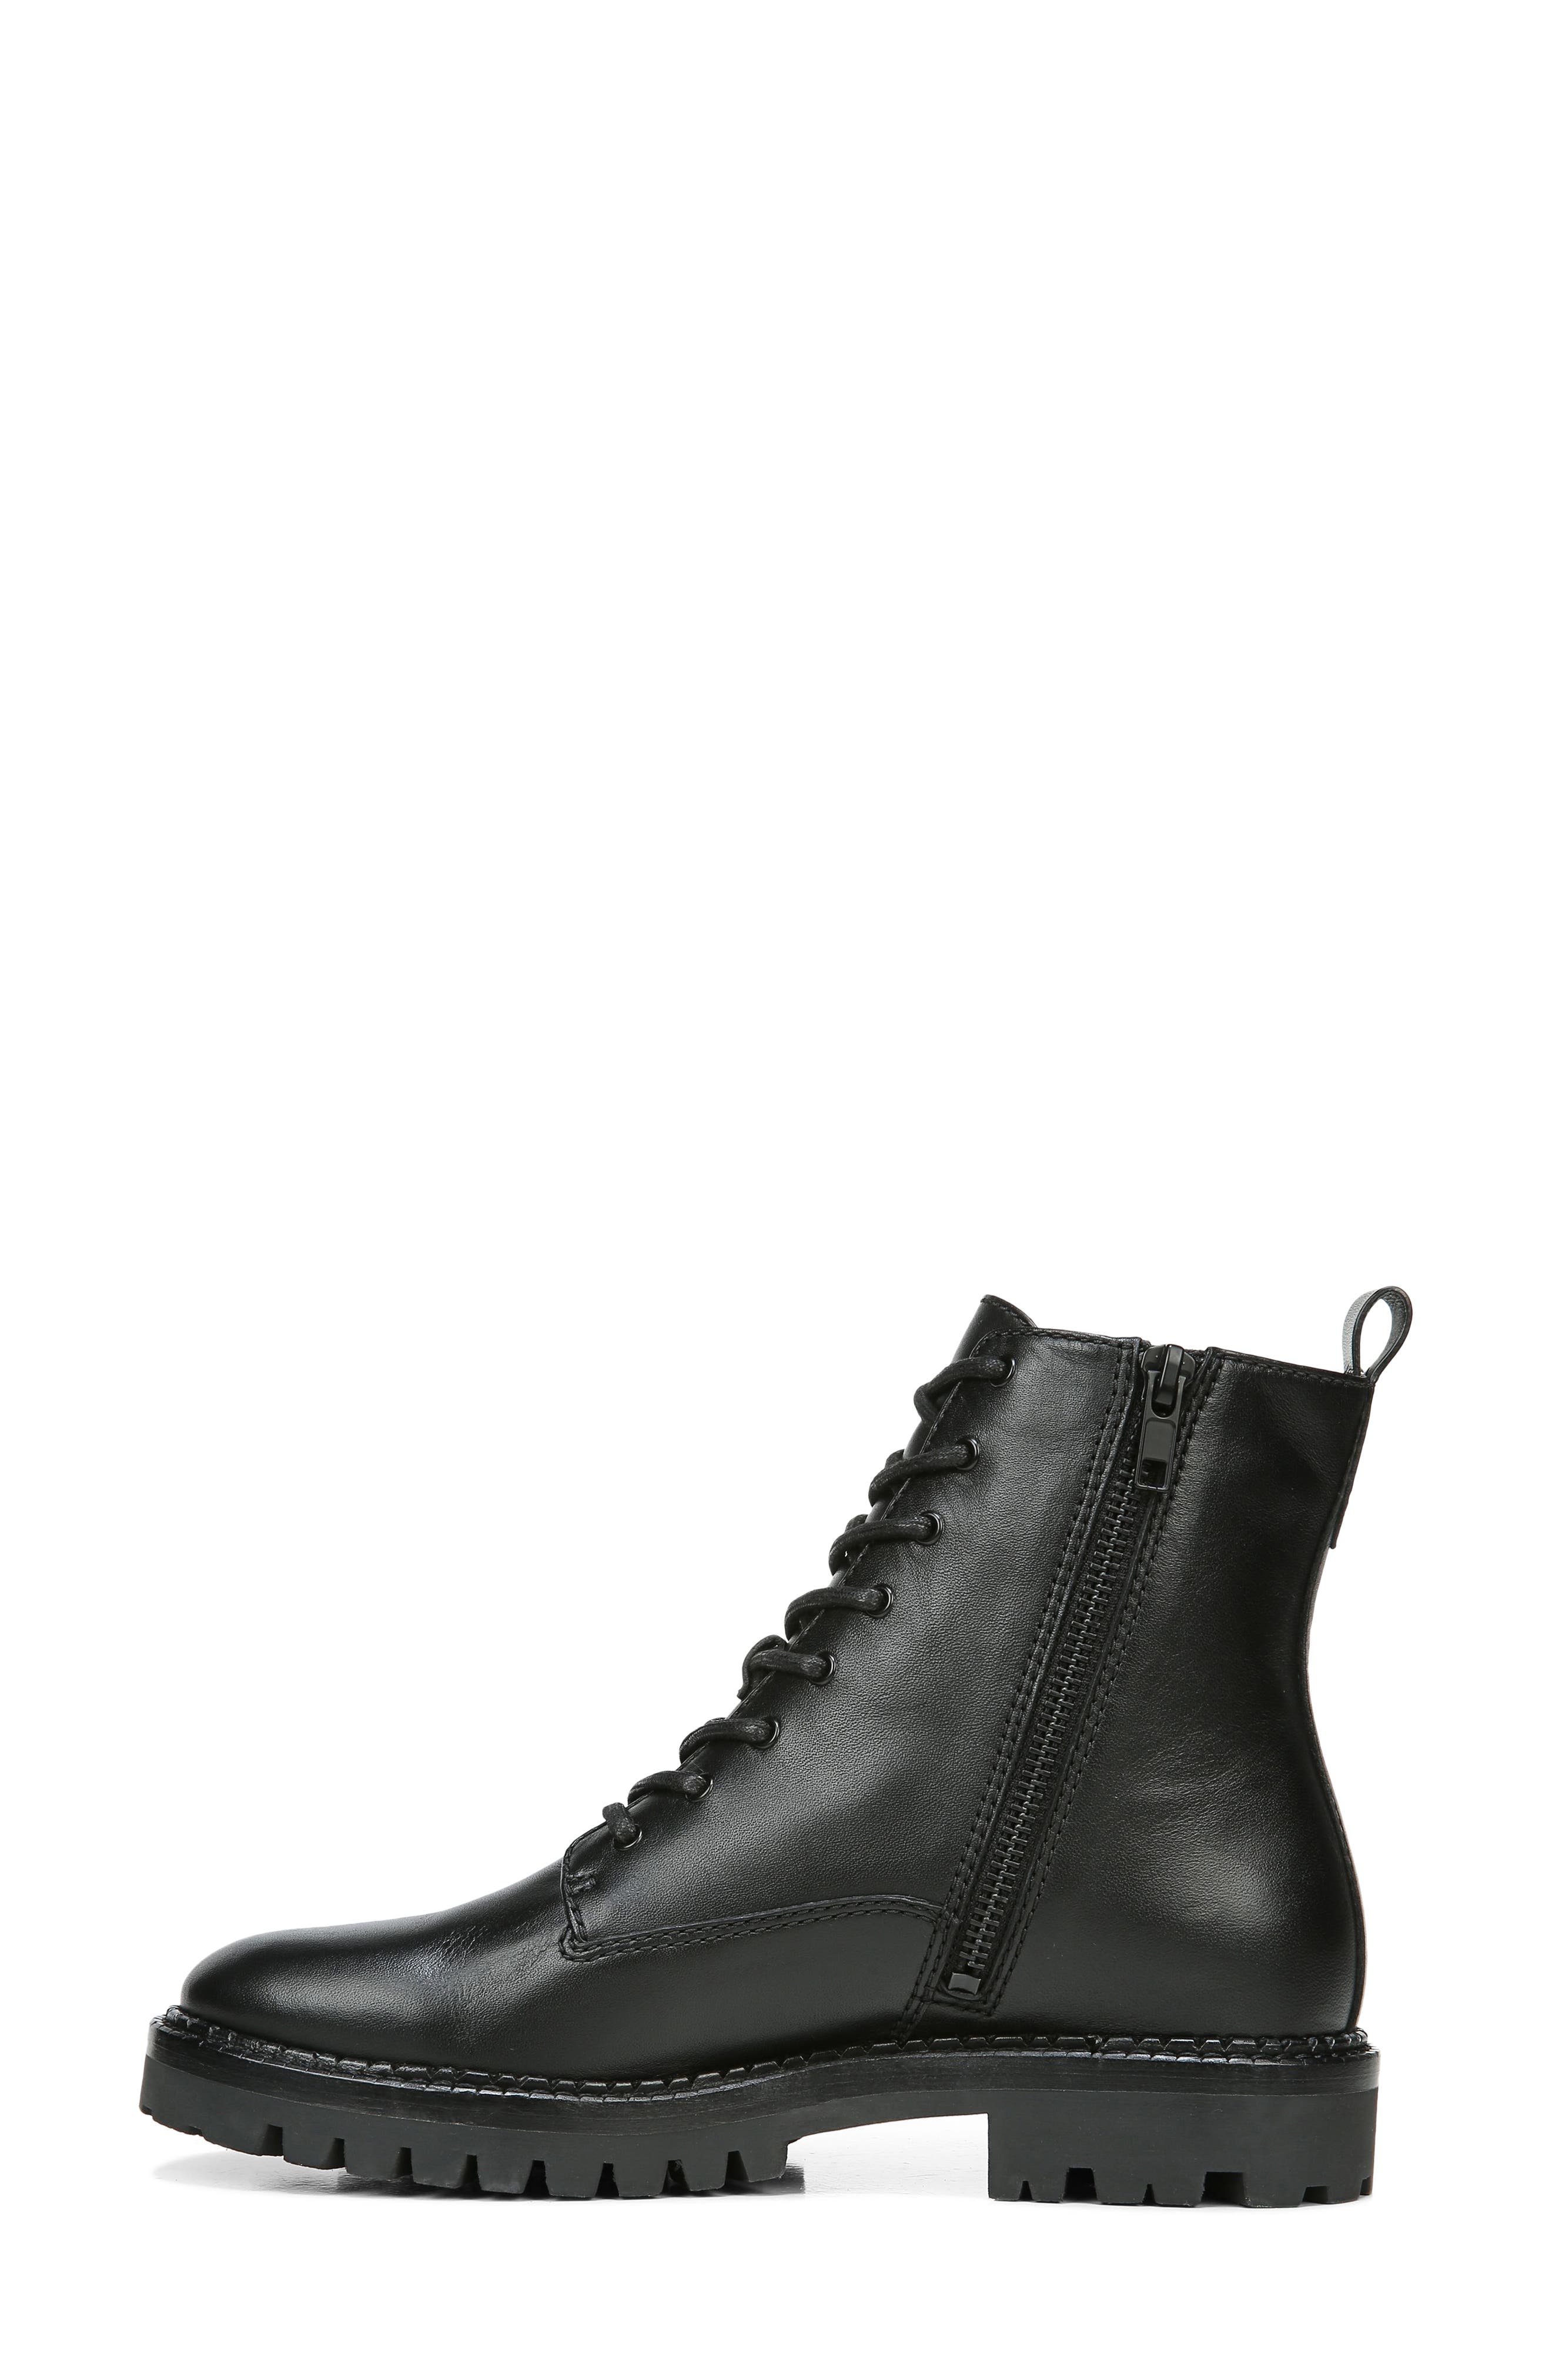 Vince | Cabria Lug Water Resistant Lace-Up Boot | HauteLook